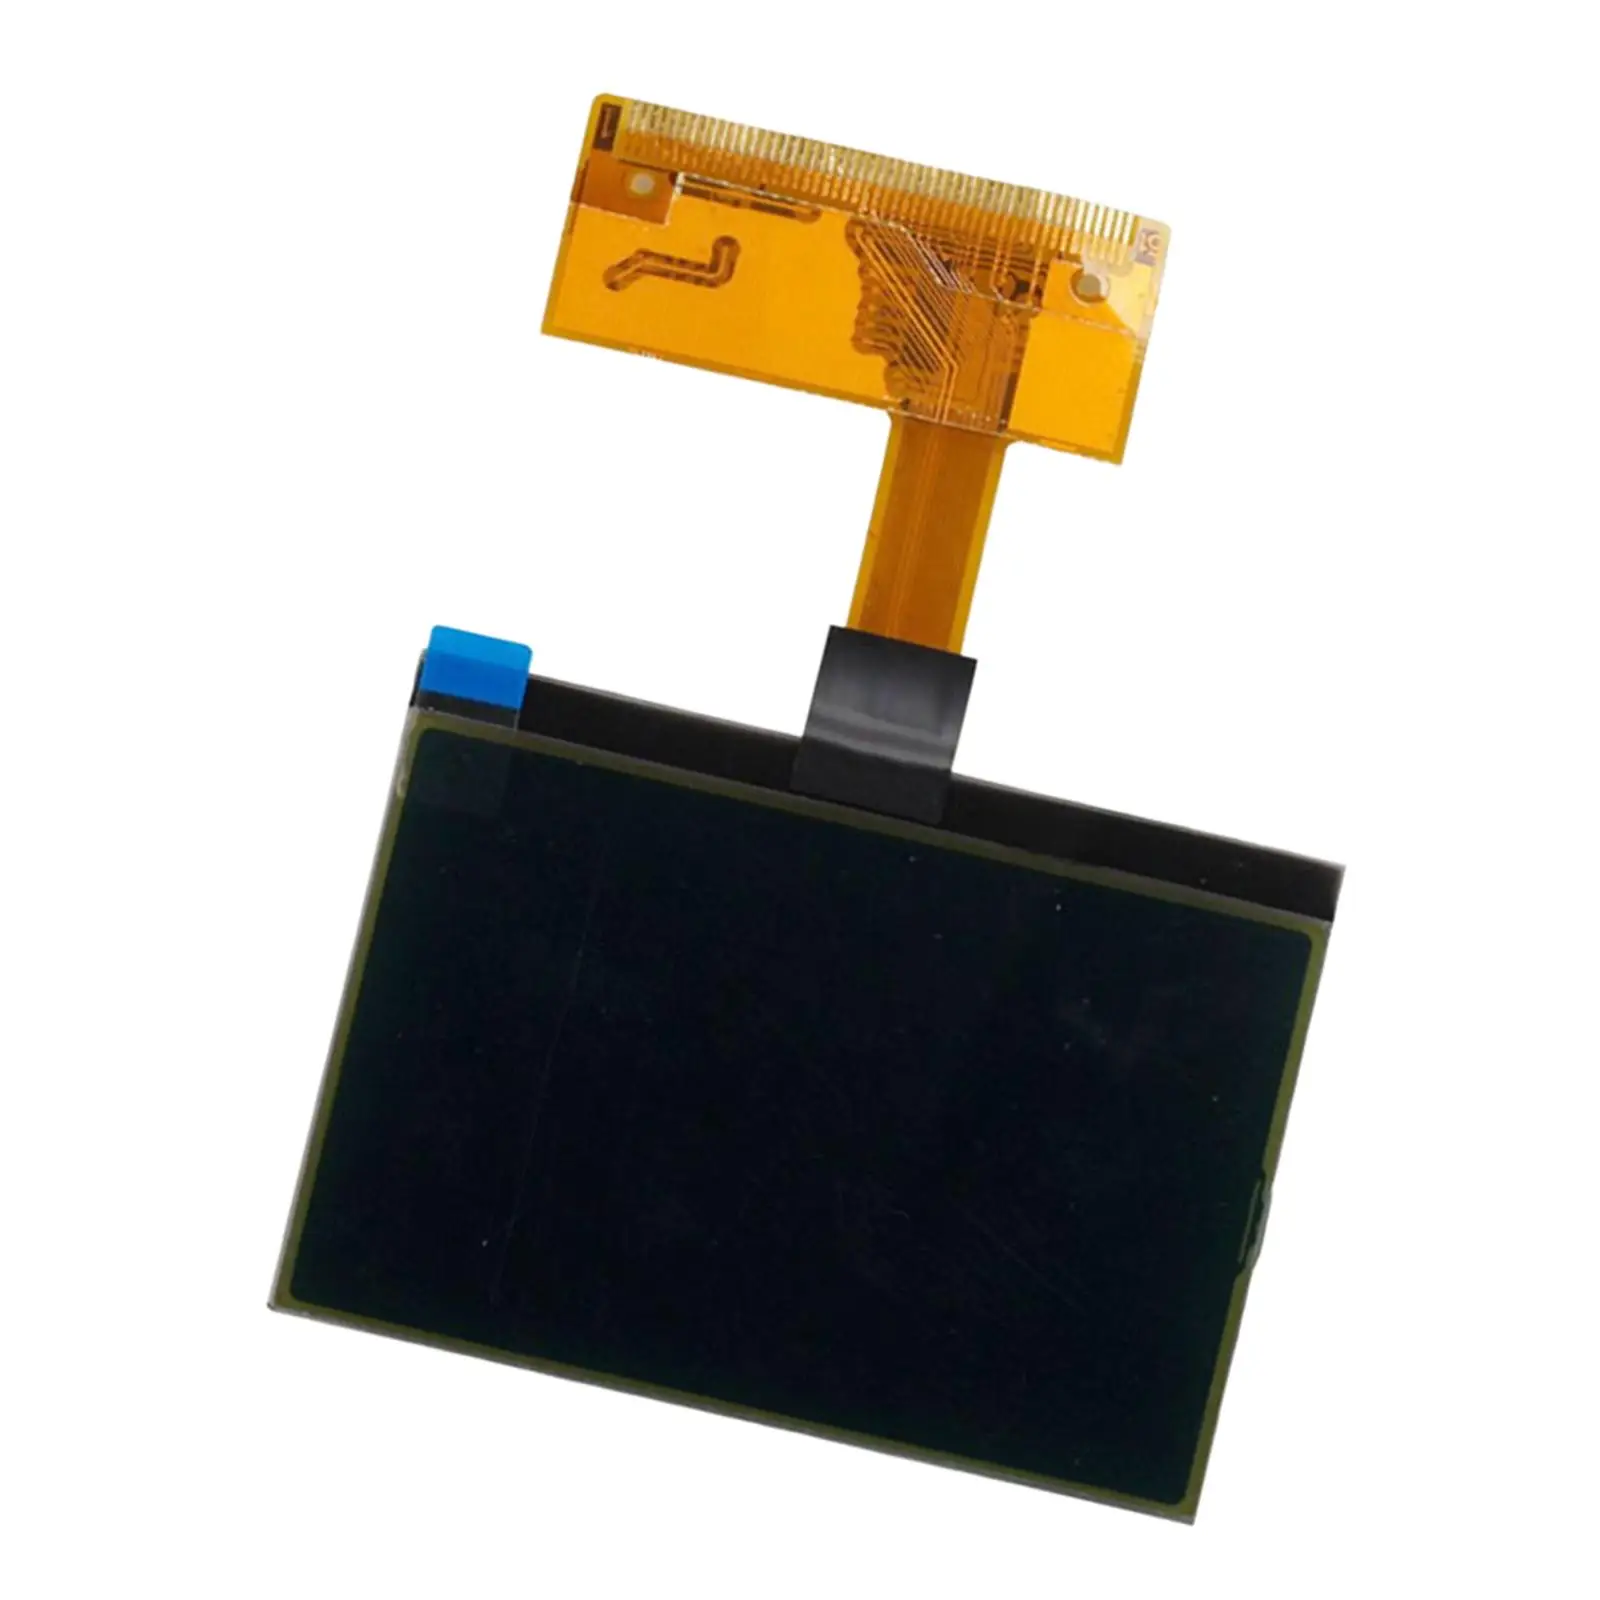 LCD Display Screen 15 inch Monitor Display Dashboard Repair   8N 9-06 Vehicle Parts Replace Durable Accessories